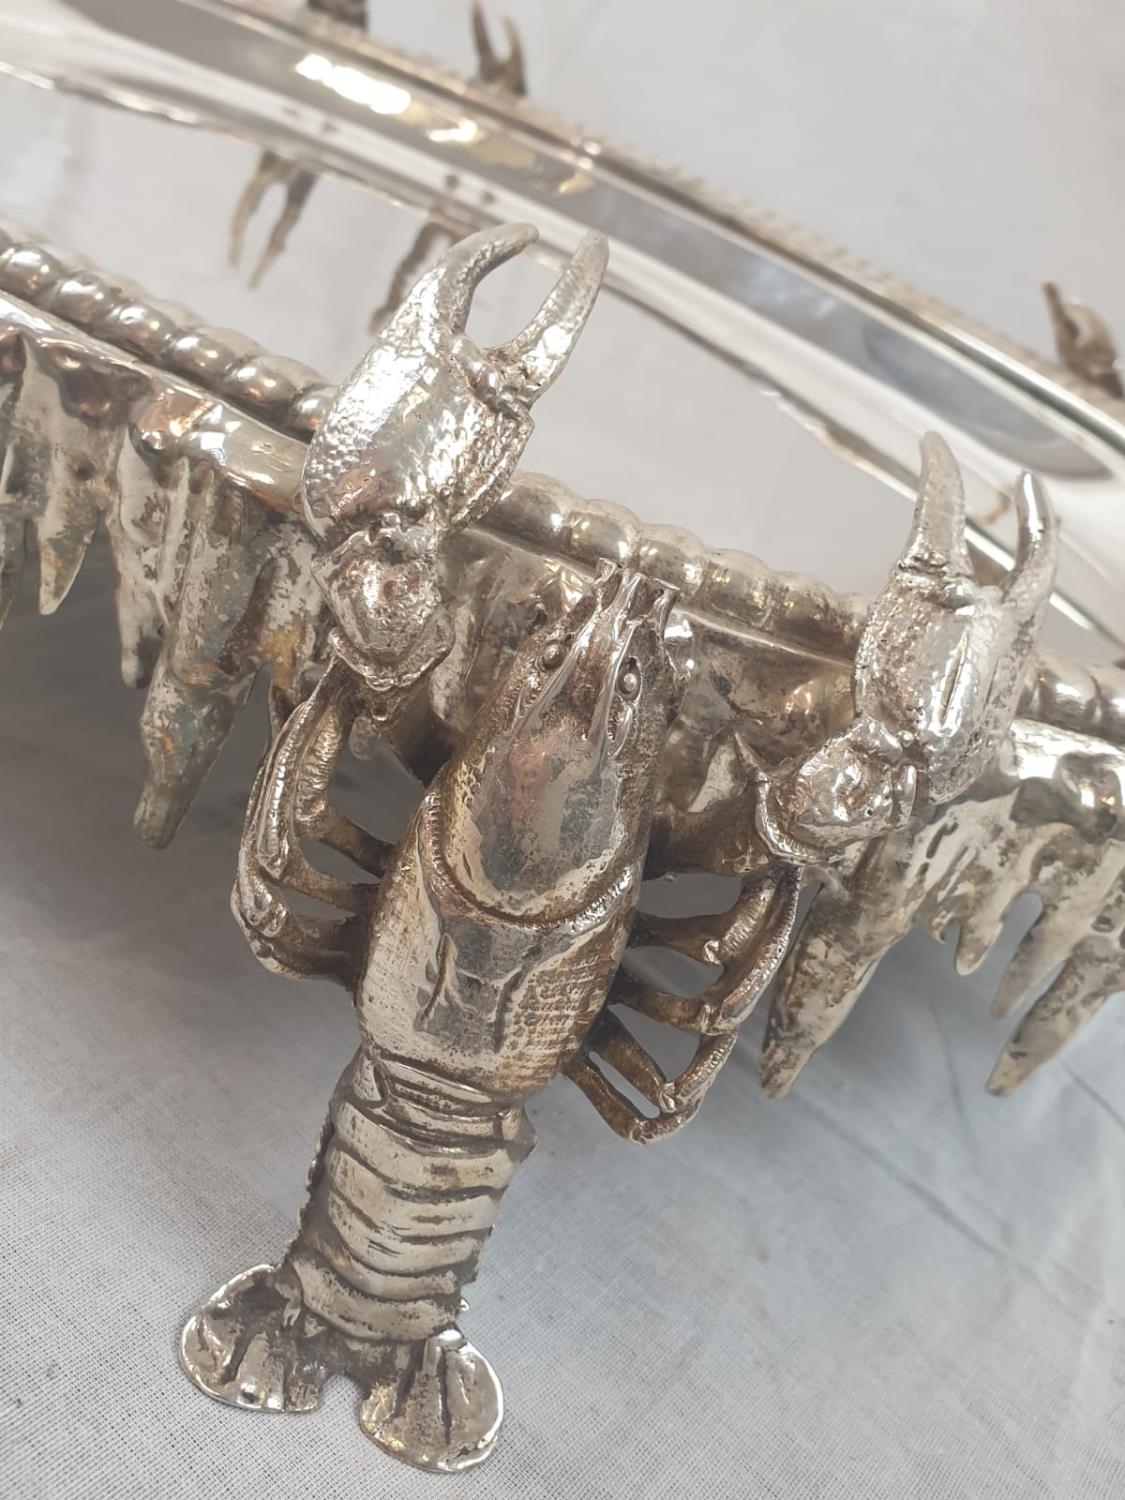 A VERY RARE SPANISH SILVER LOBSTER SERVING TRAY CIRCA 1920 , 4.2KG AND 50 X 35 CMS. AN INTERESTING - Bild 5 aus 10